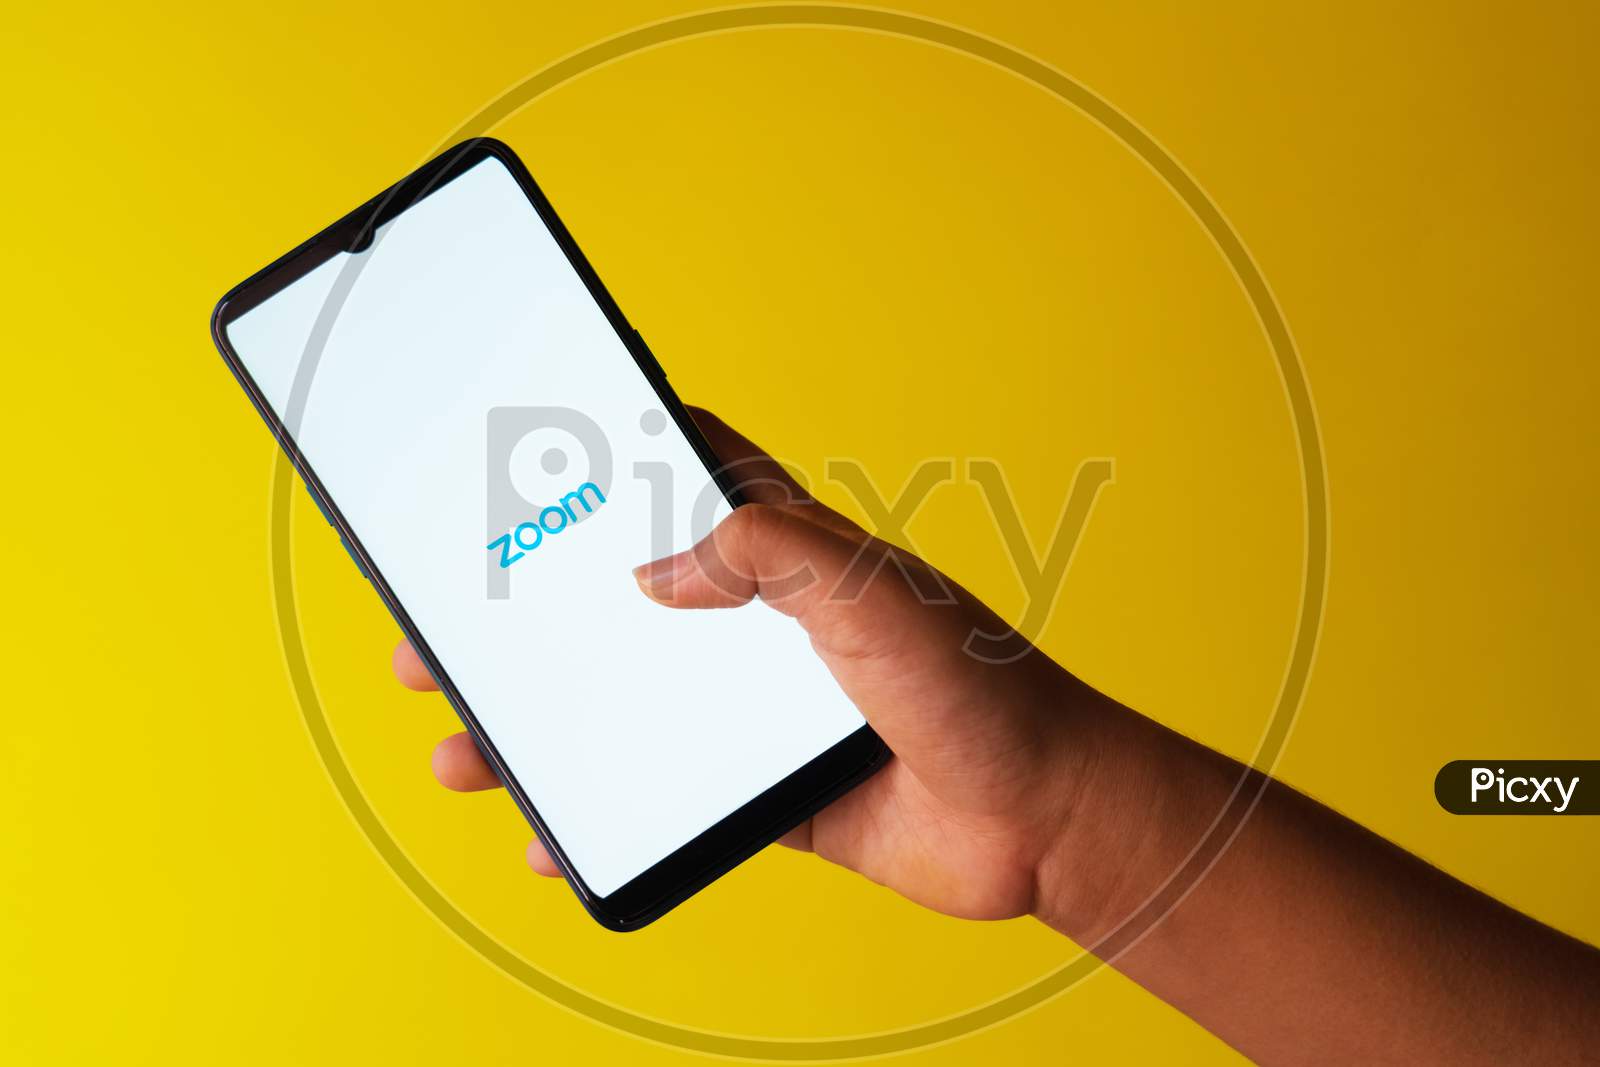 Zoom app logo on a smart phone held in hand against yellow extendable background with copy space